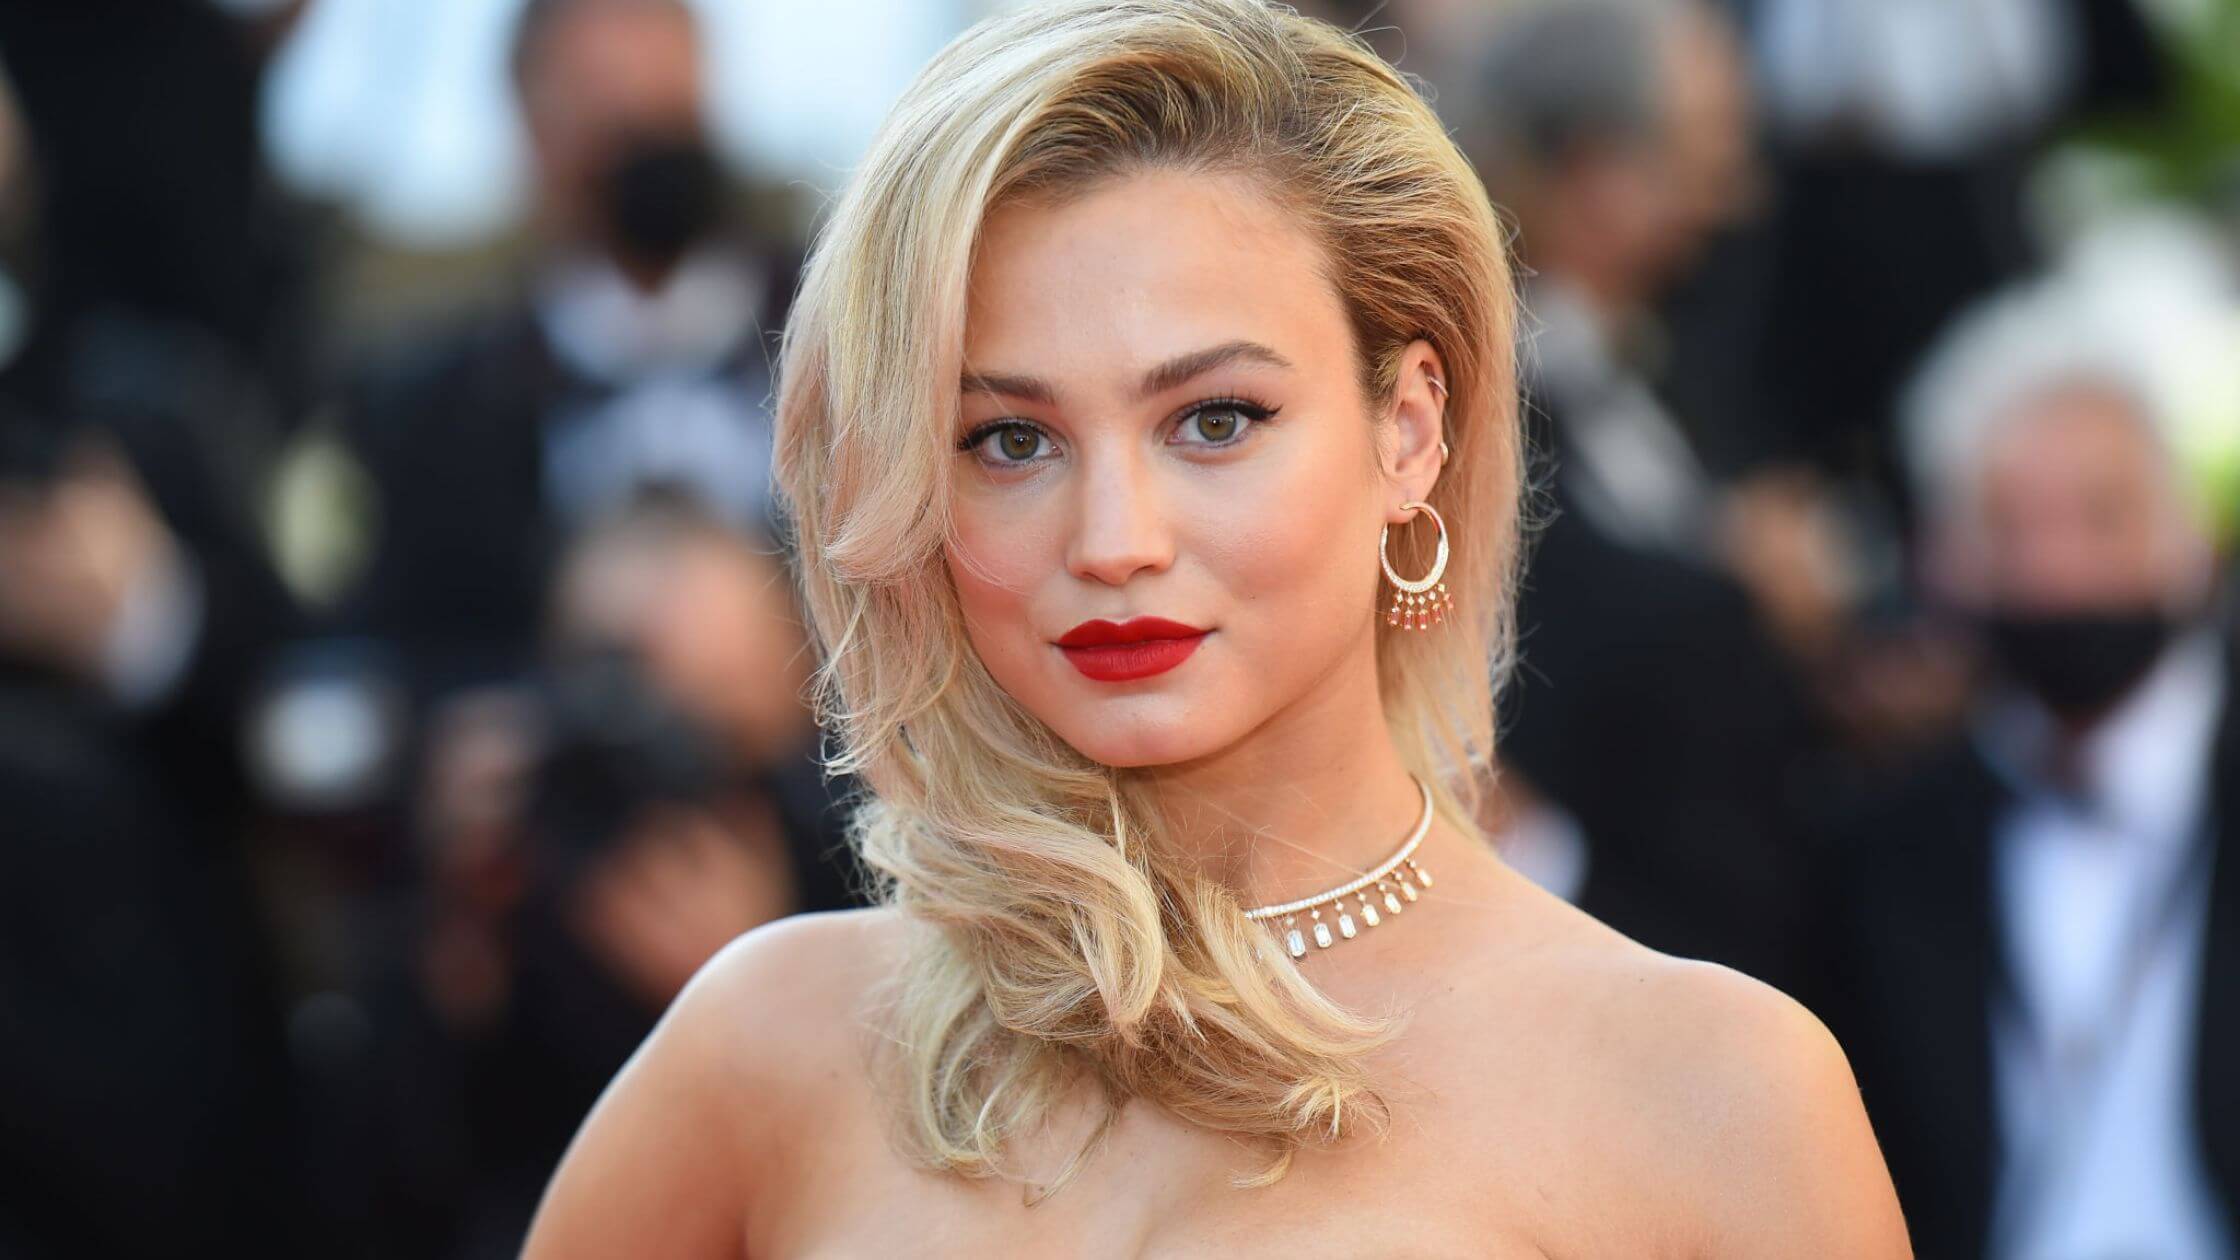 Rose Bertram Measurements, Height, Weight, Age, Net Worth, And More ...